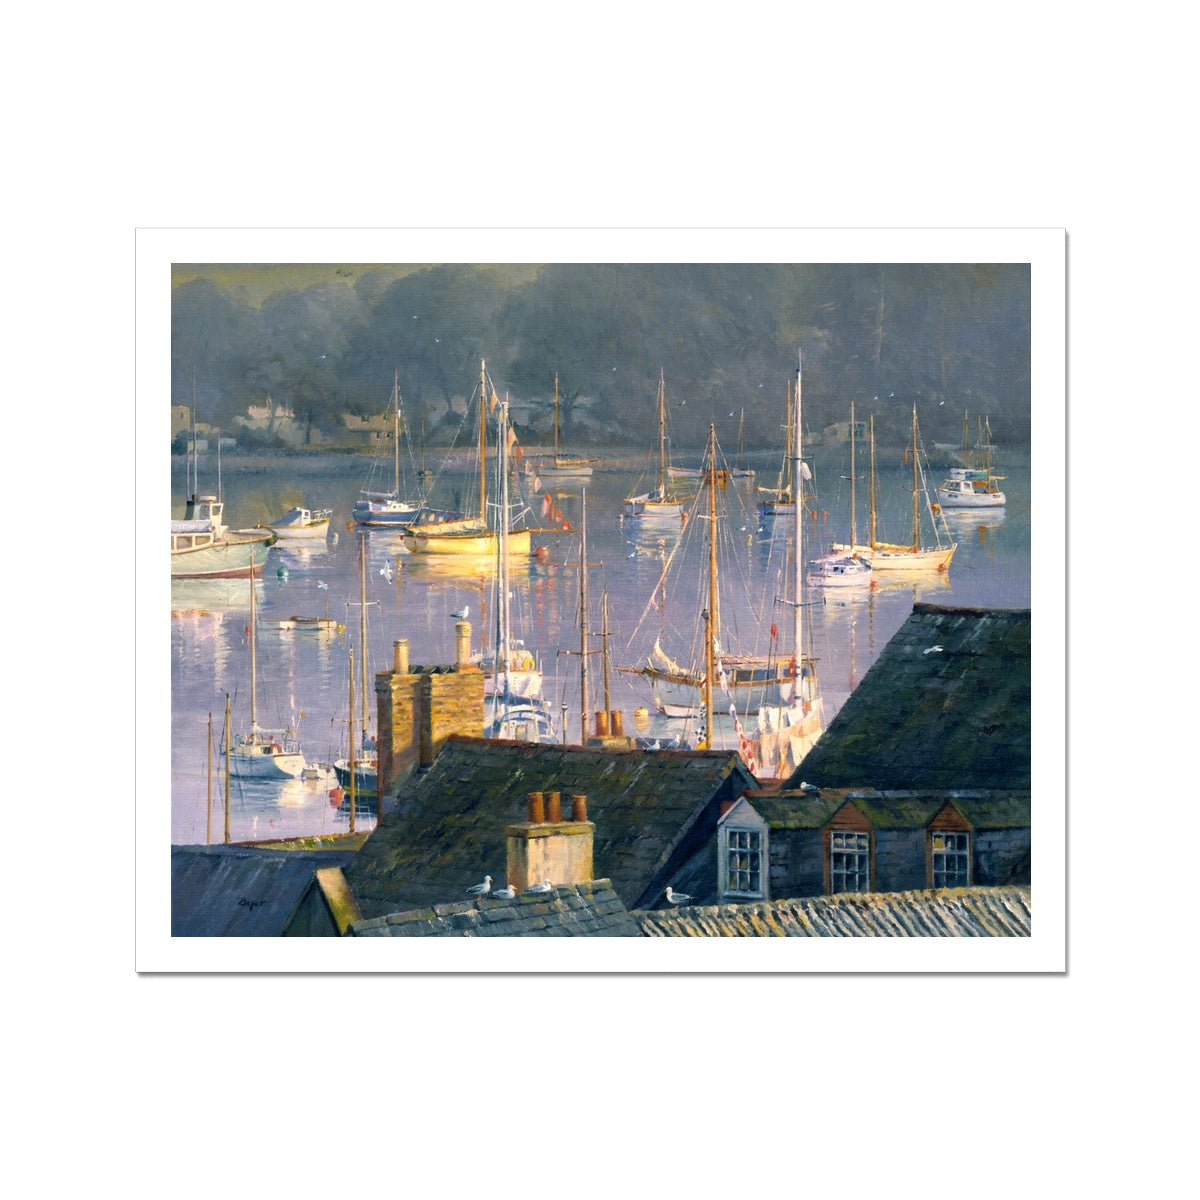 Ted Dyer Fine Art Print. Open Edition Cornish Art Print. &#39;Early Morning Calm, Falmouth Waterfront&#39;. Cornwall Art Gallery